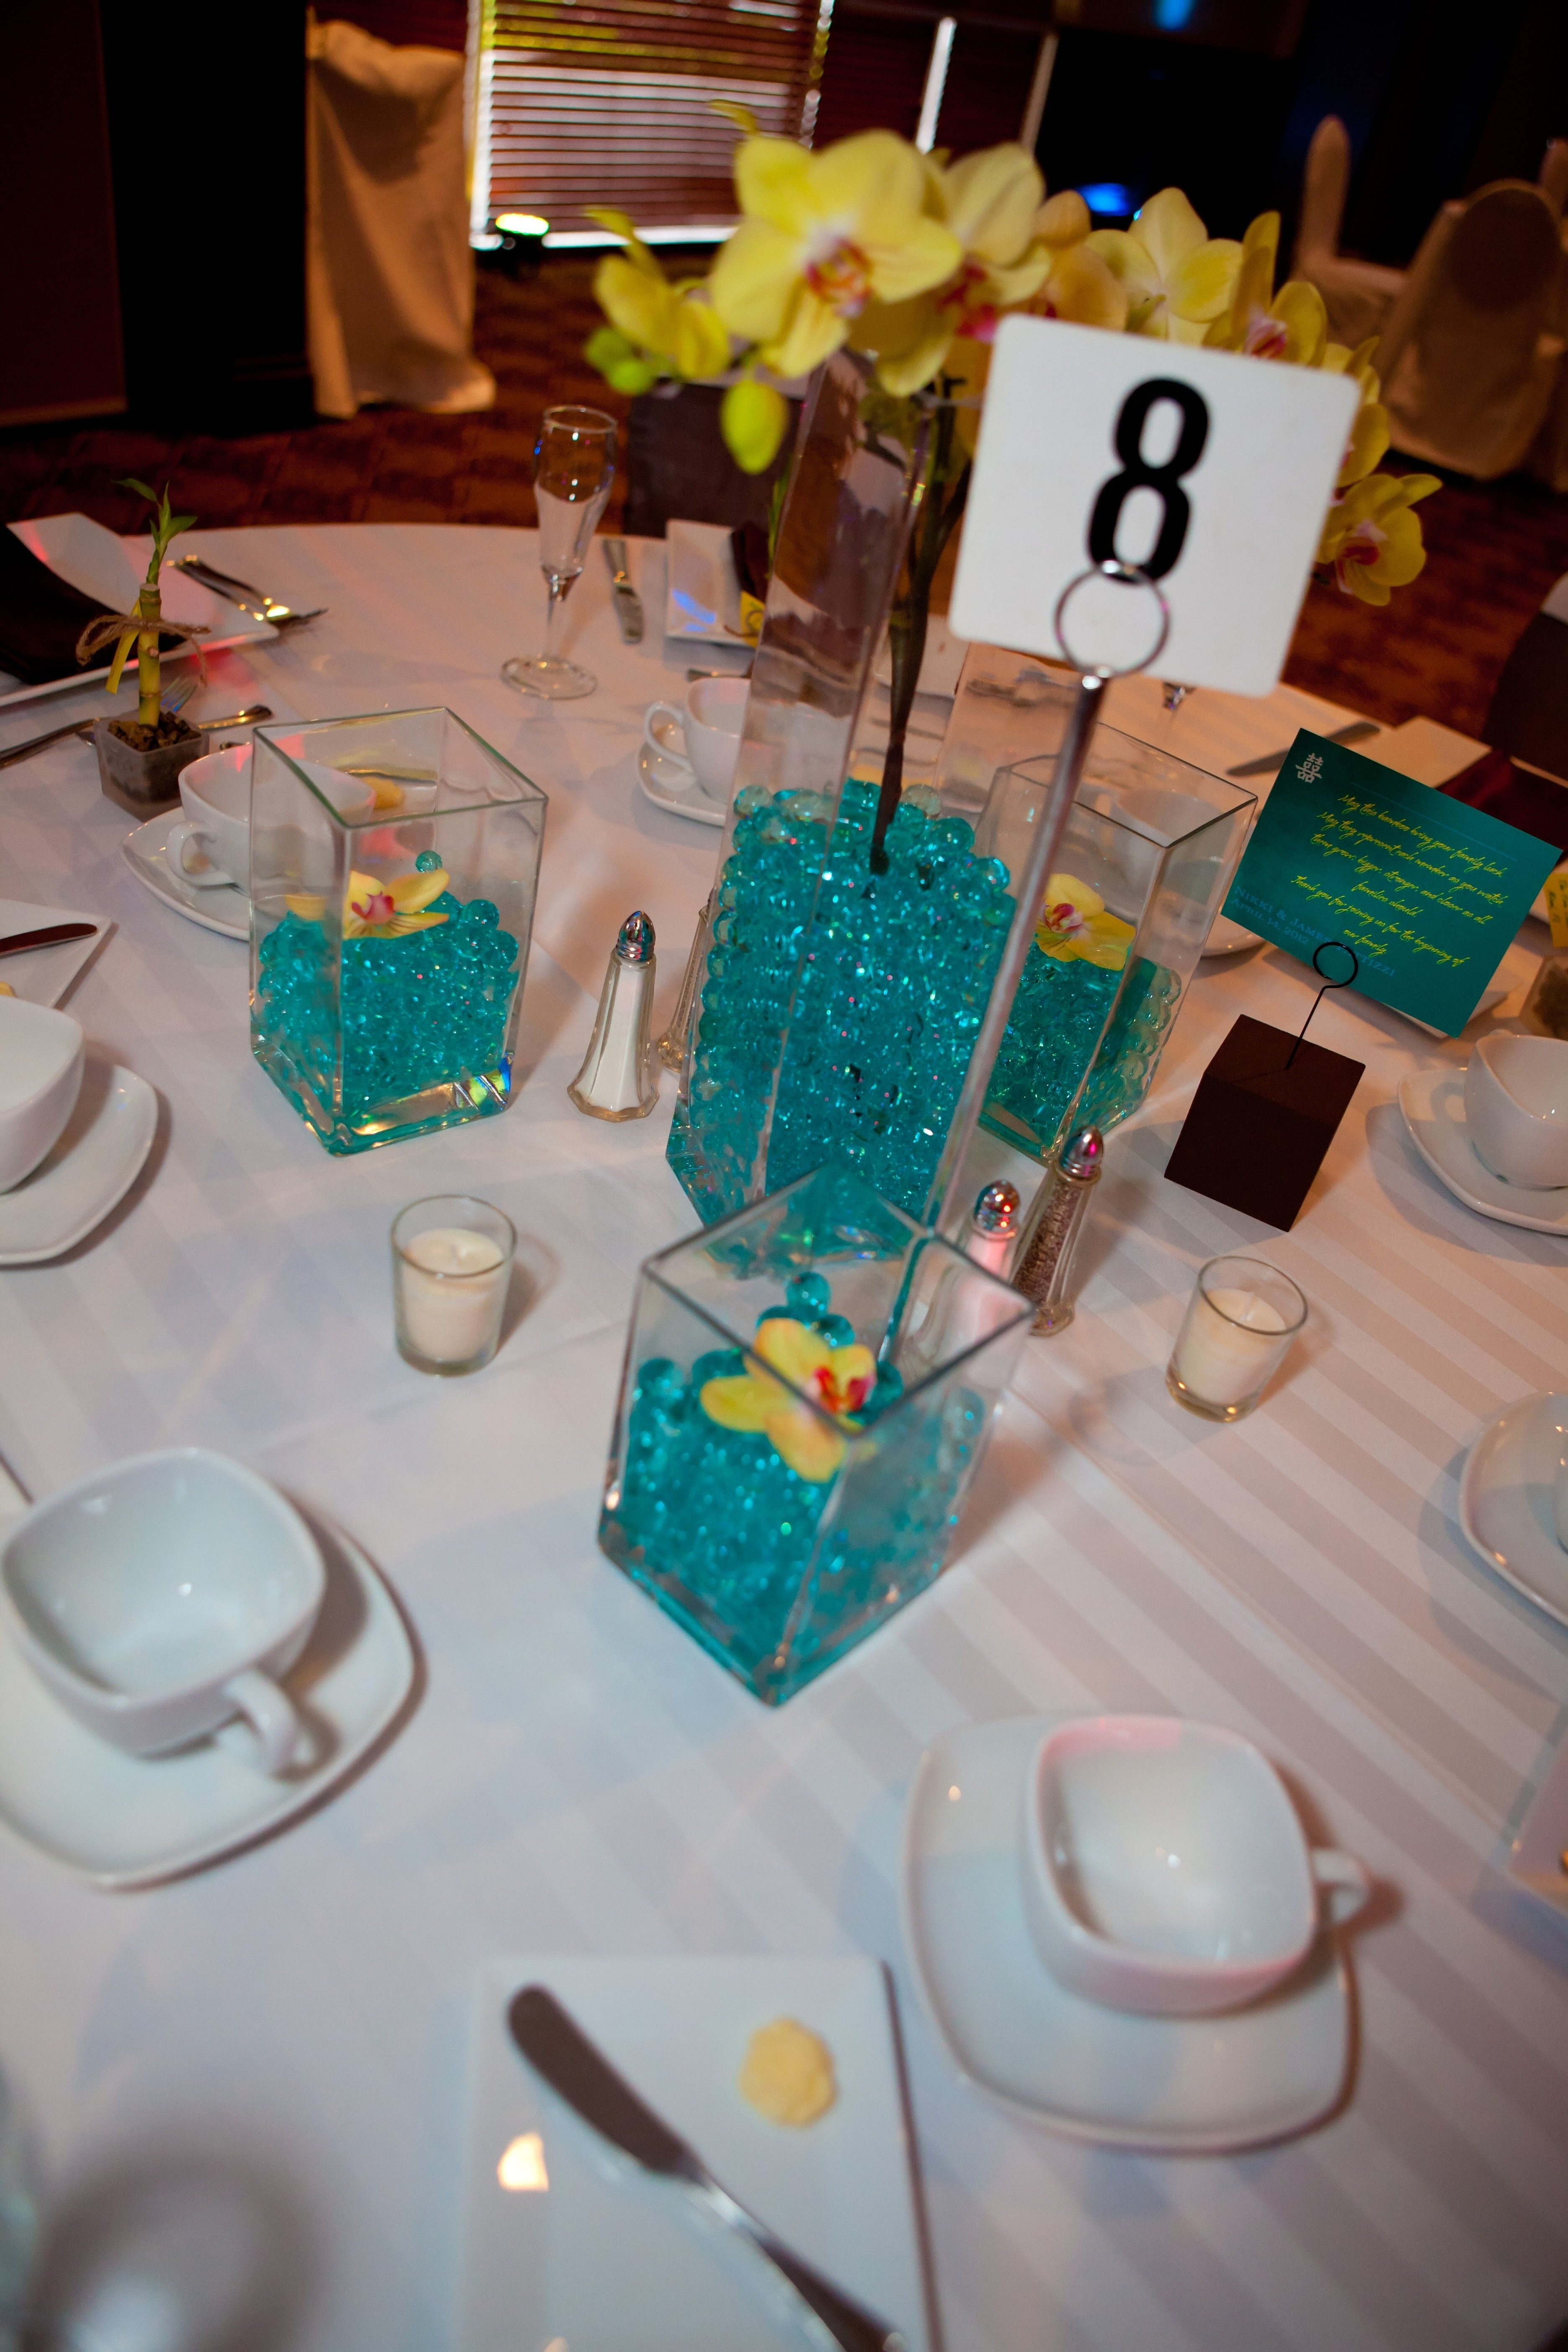 large brandy vase of wedding centerpieces square vases teal water beads yellow pertaining to square vases teal water beads yellow orchids candles